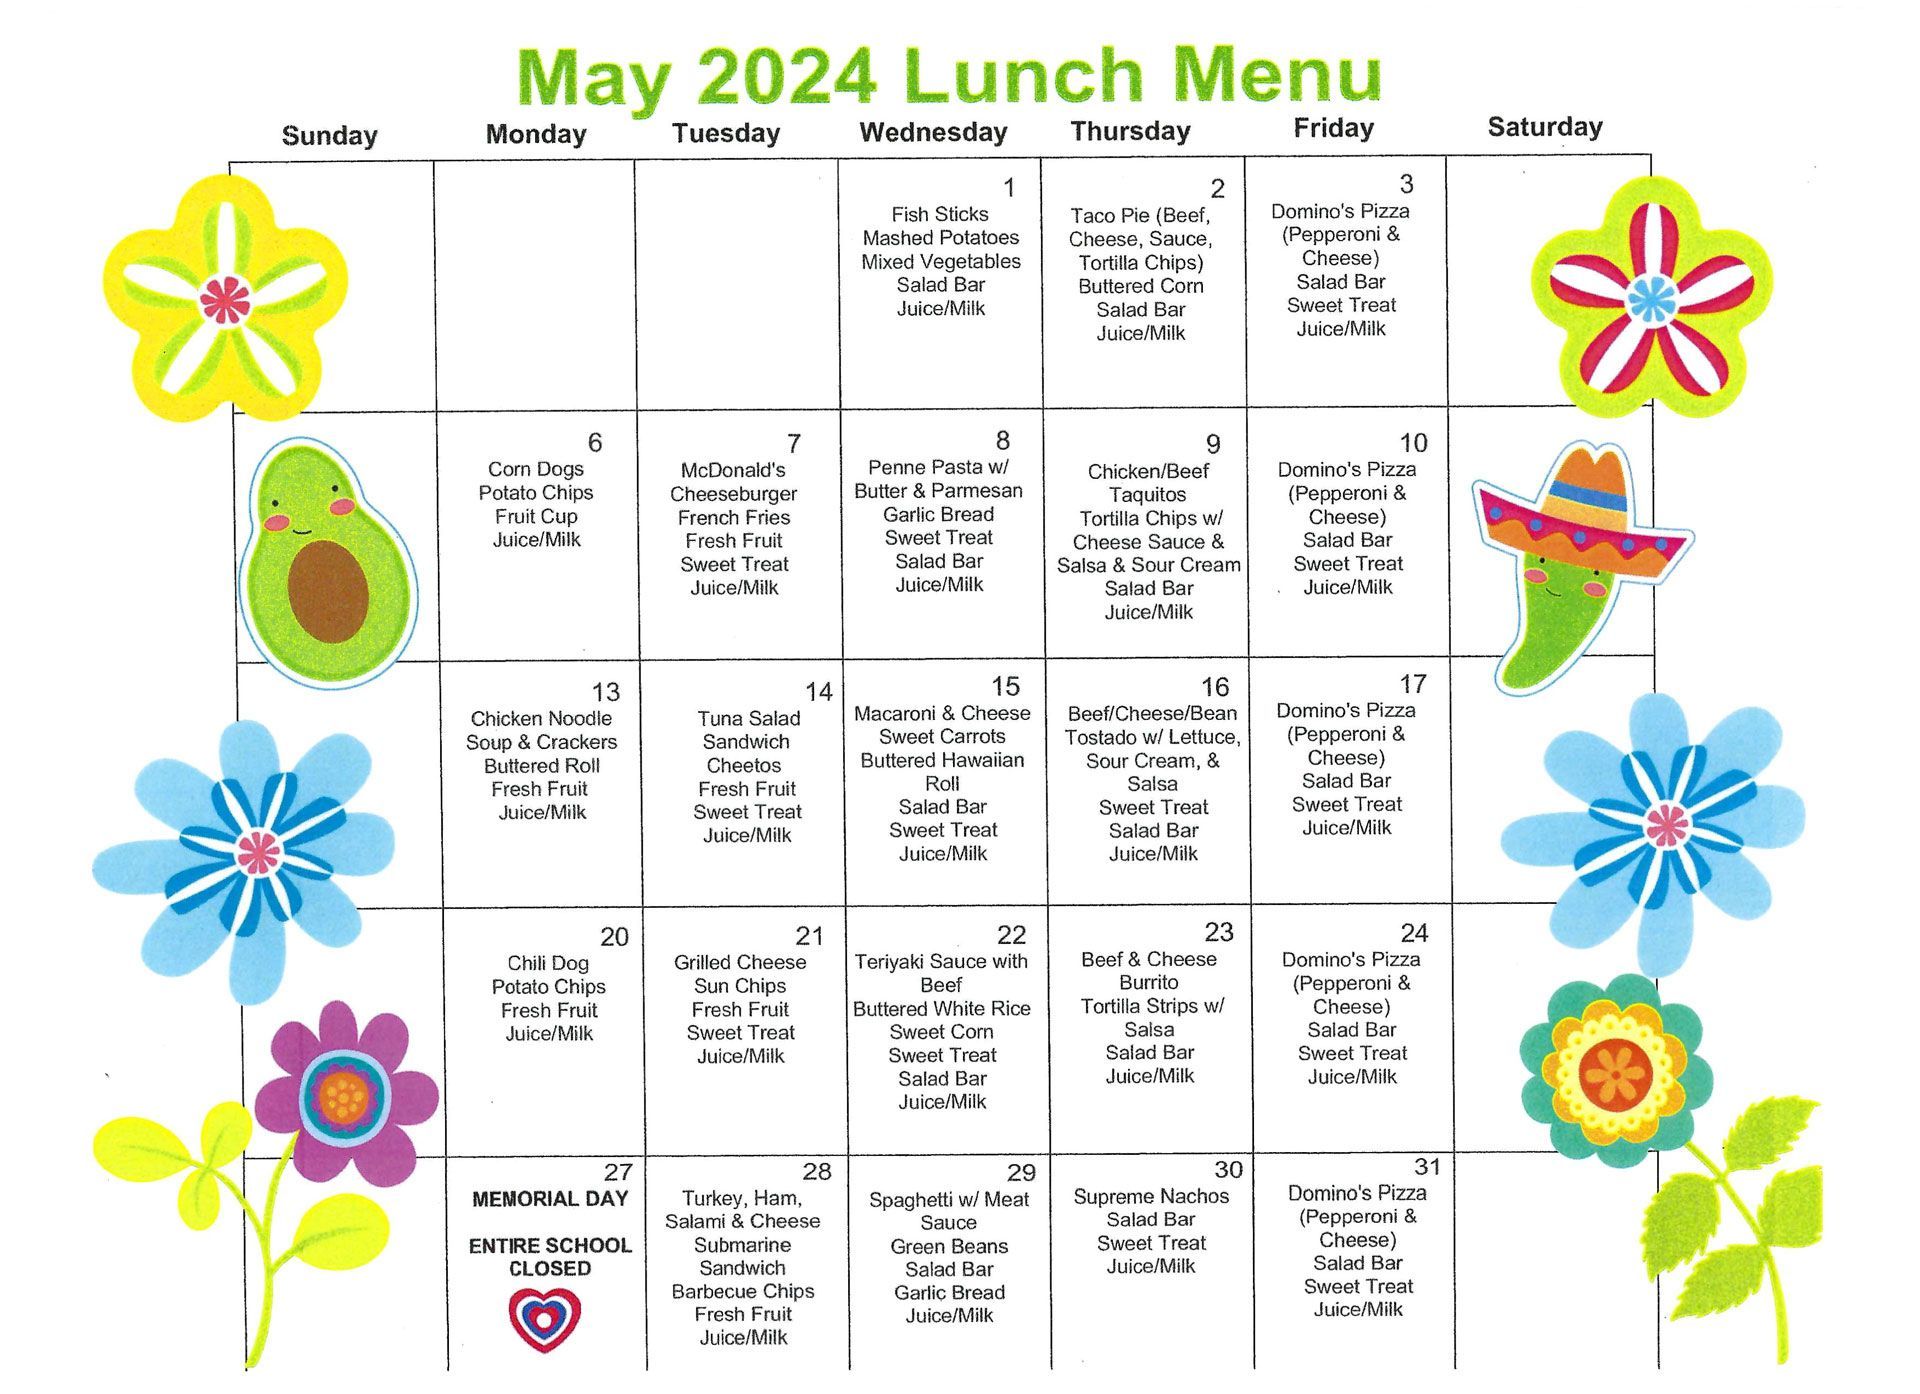 The Palm Desert Learning Tree Center May 2024 Lunch Menu